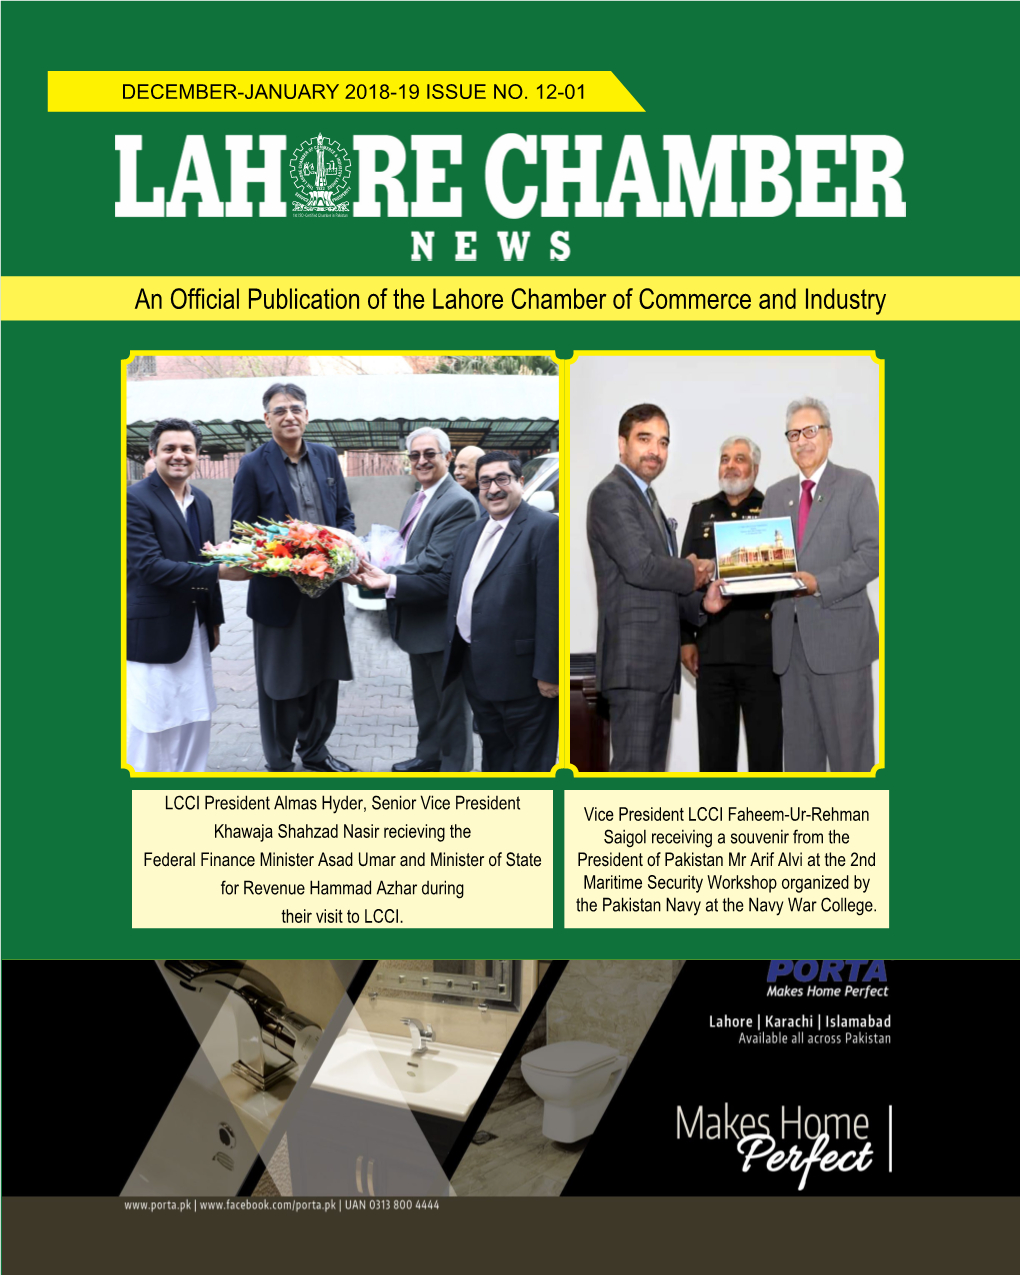 An Official Publication of the Lahore Chamber of Commerce and Industry